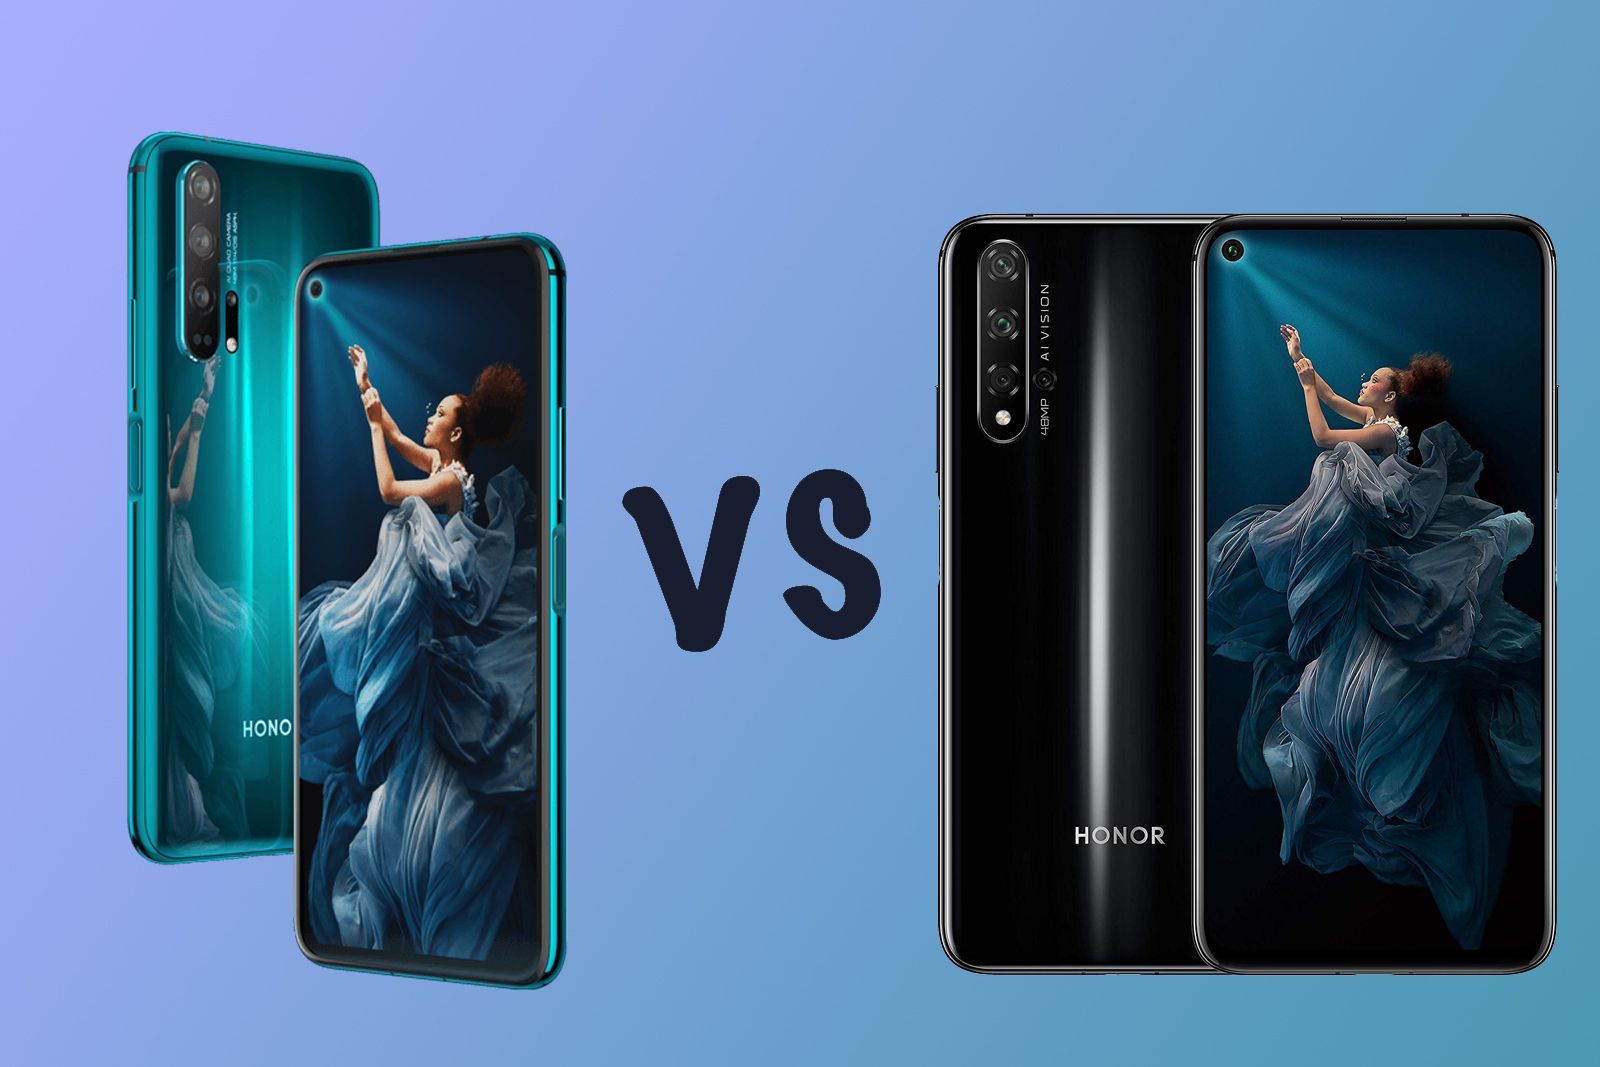 Honor 20 Pro Vs Honor 20 Differences Compared image 1